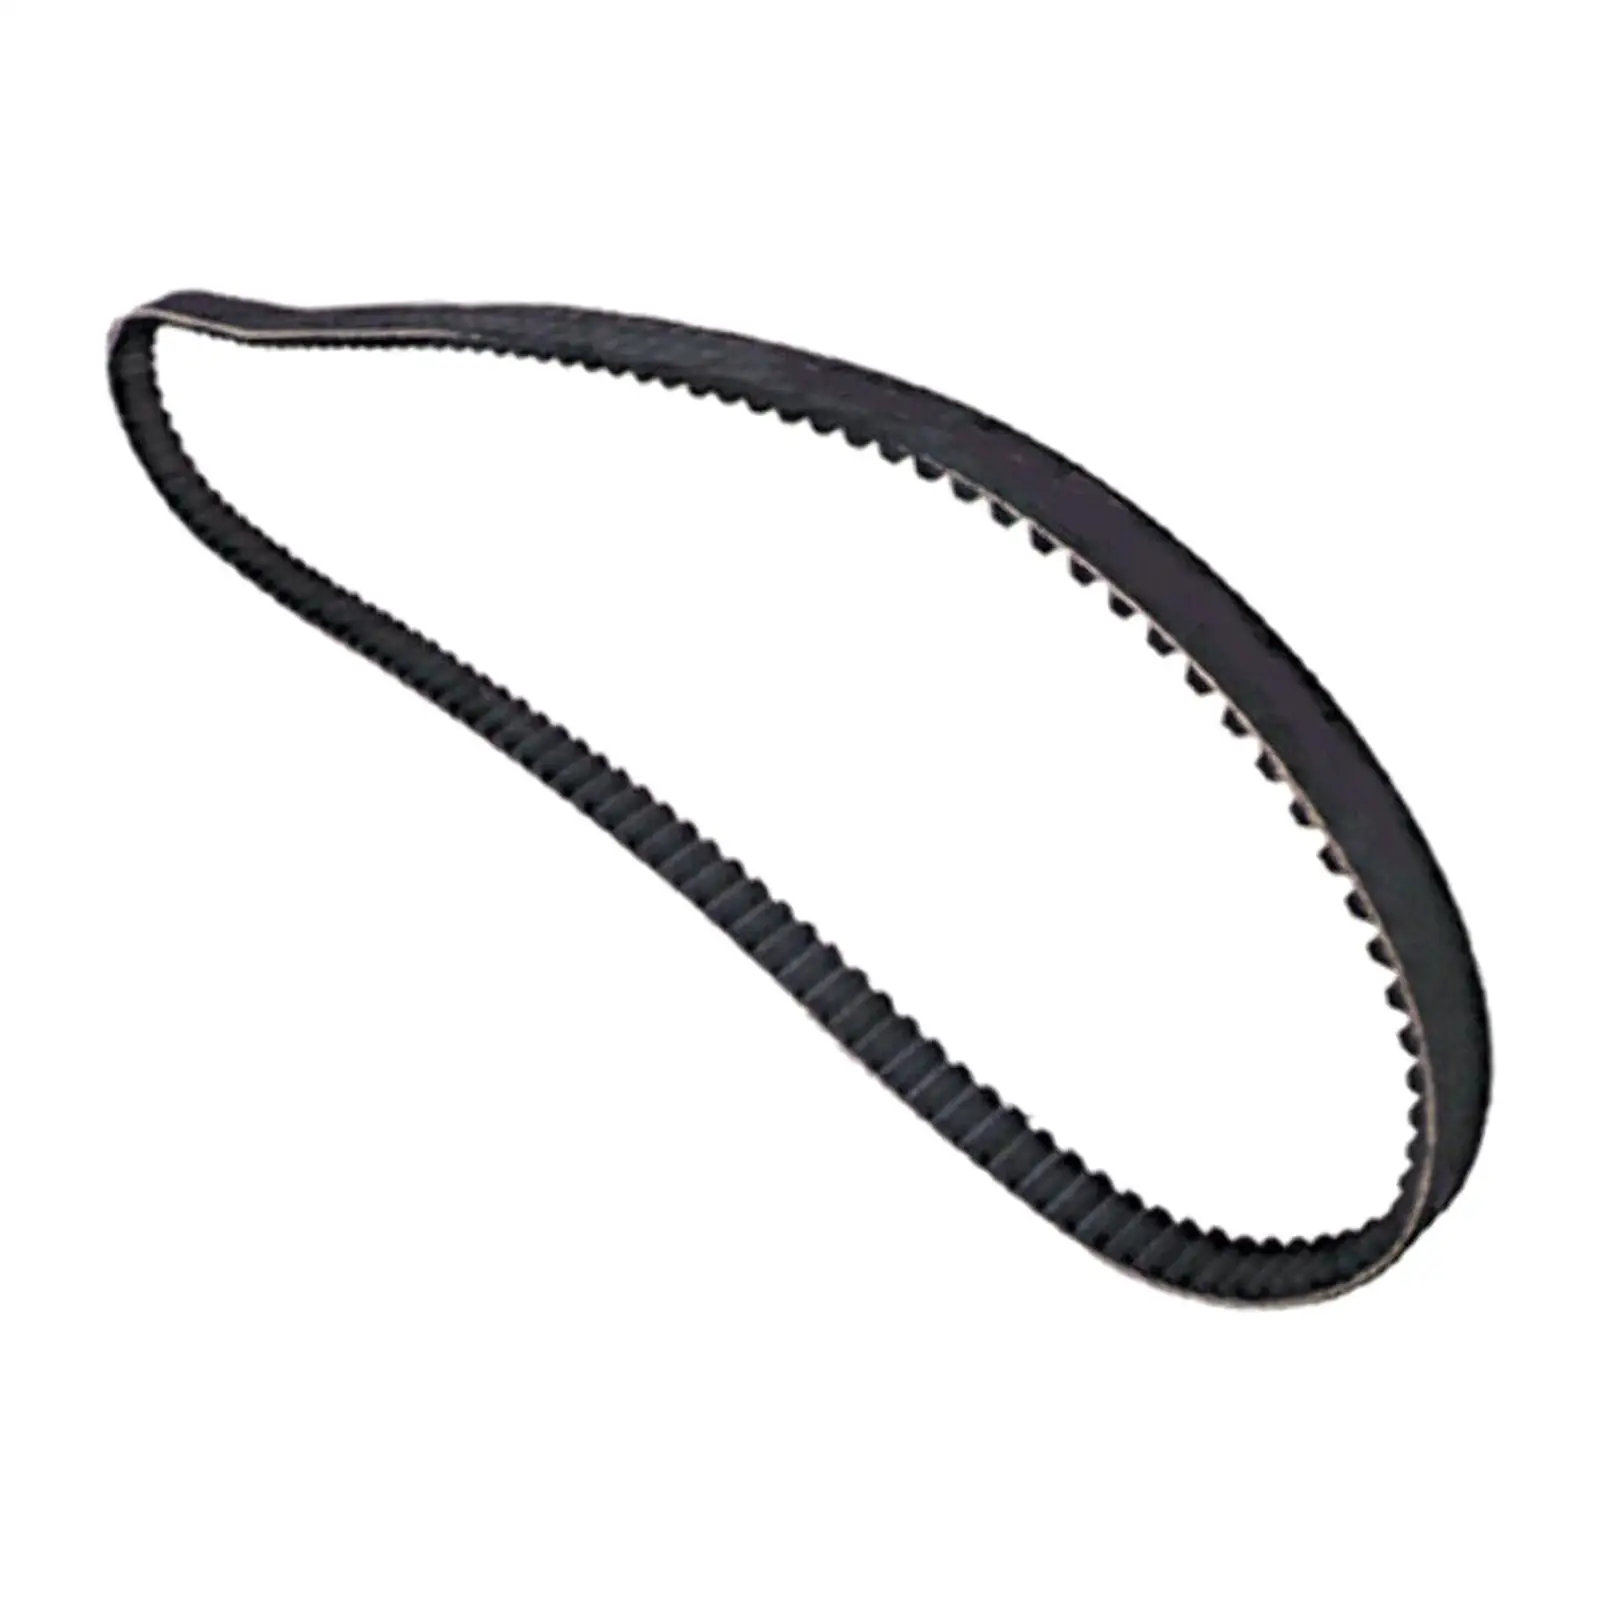 Rear Drive Belt 1204-0051 Motorcycle Accessories Rubber 58-433 133 Tooth 1 1/8